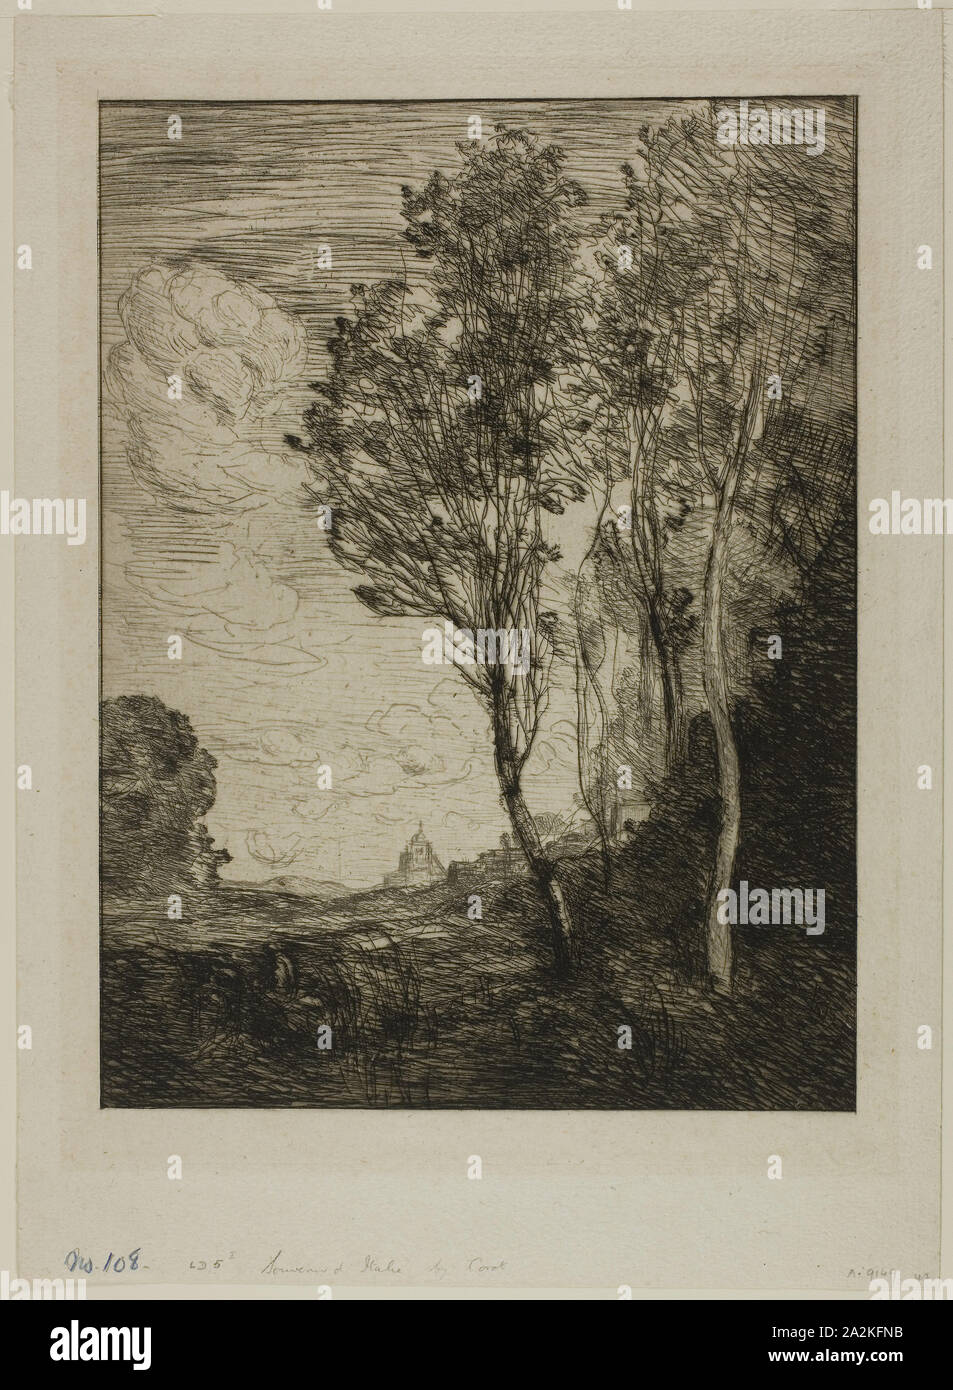 Souvenir of Italy, 1862, Jean-Baptiste-Camille Corot, French, 1796-1875, France, Etching on cream laid paper, 293 × 220 mm (image), 370 × 270 mm (sheet Stock Photo